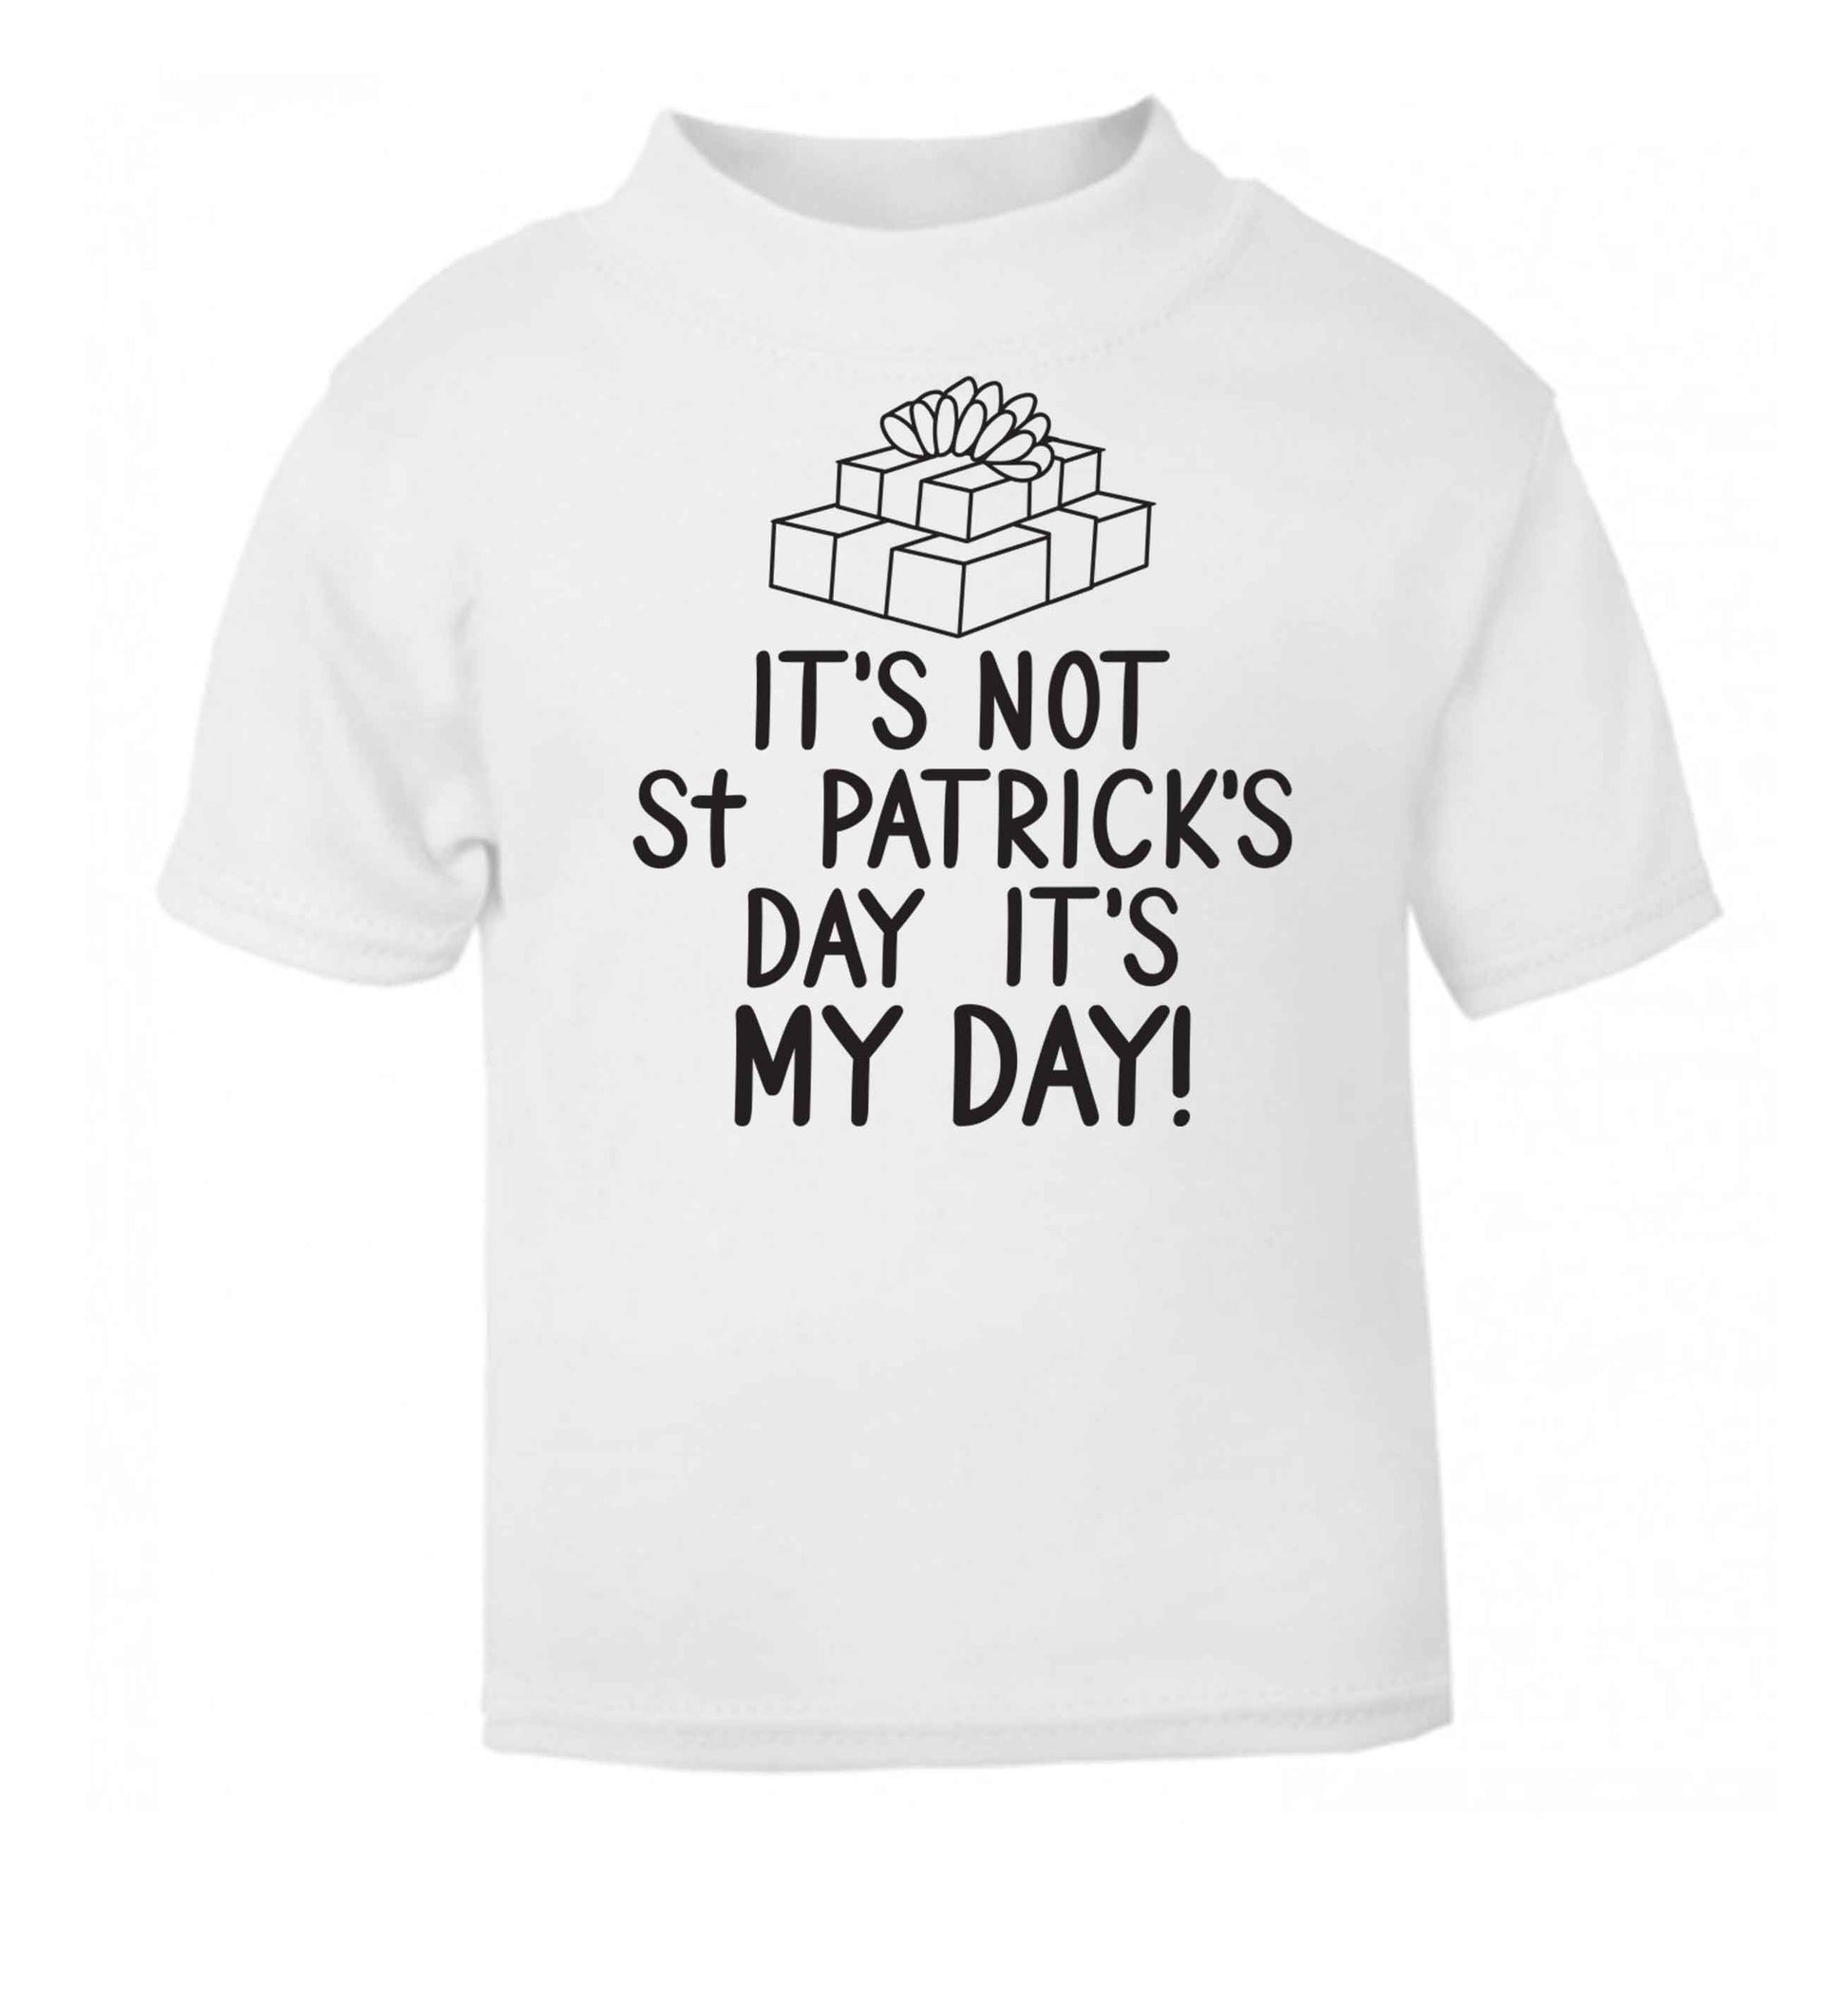 Funny gifts for your mum on mother's dayor her birthday! It's not St Patricks day it's my day white baby toddler Tshirt 2 Years